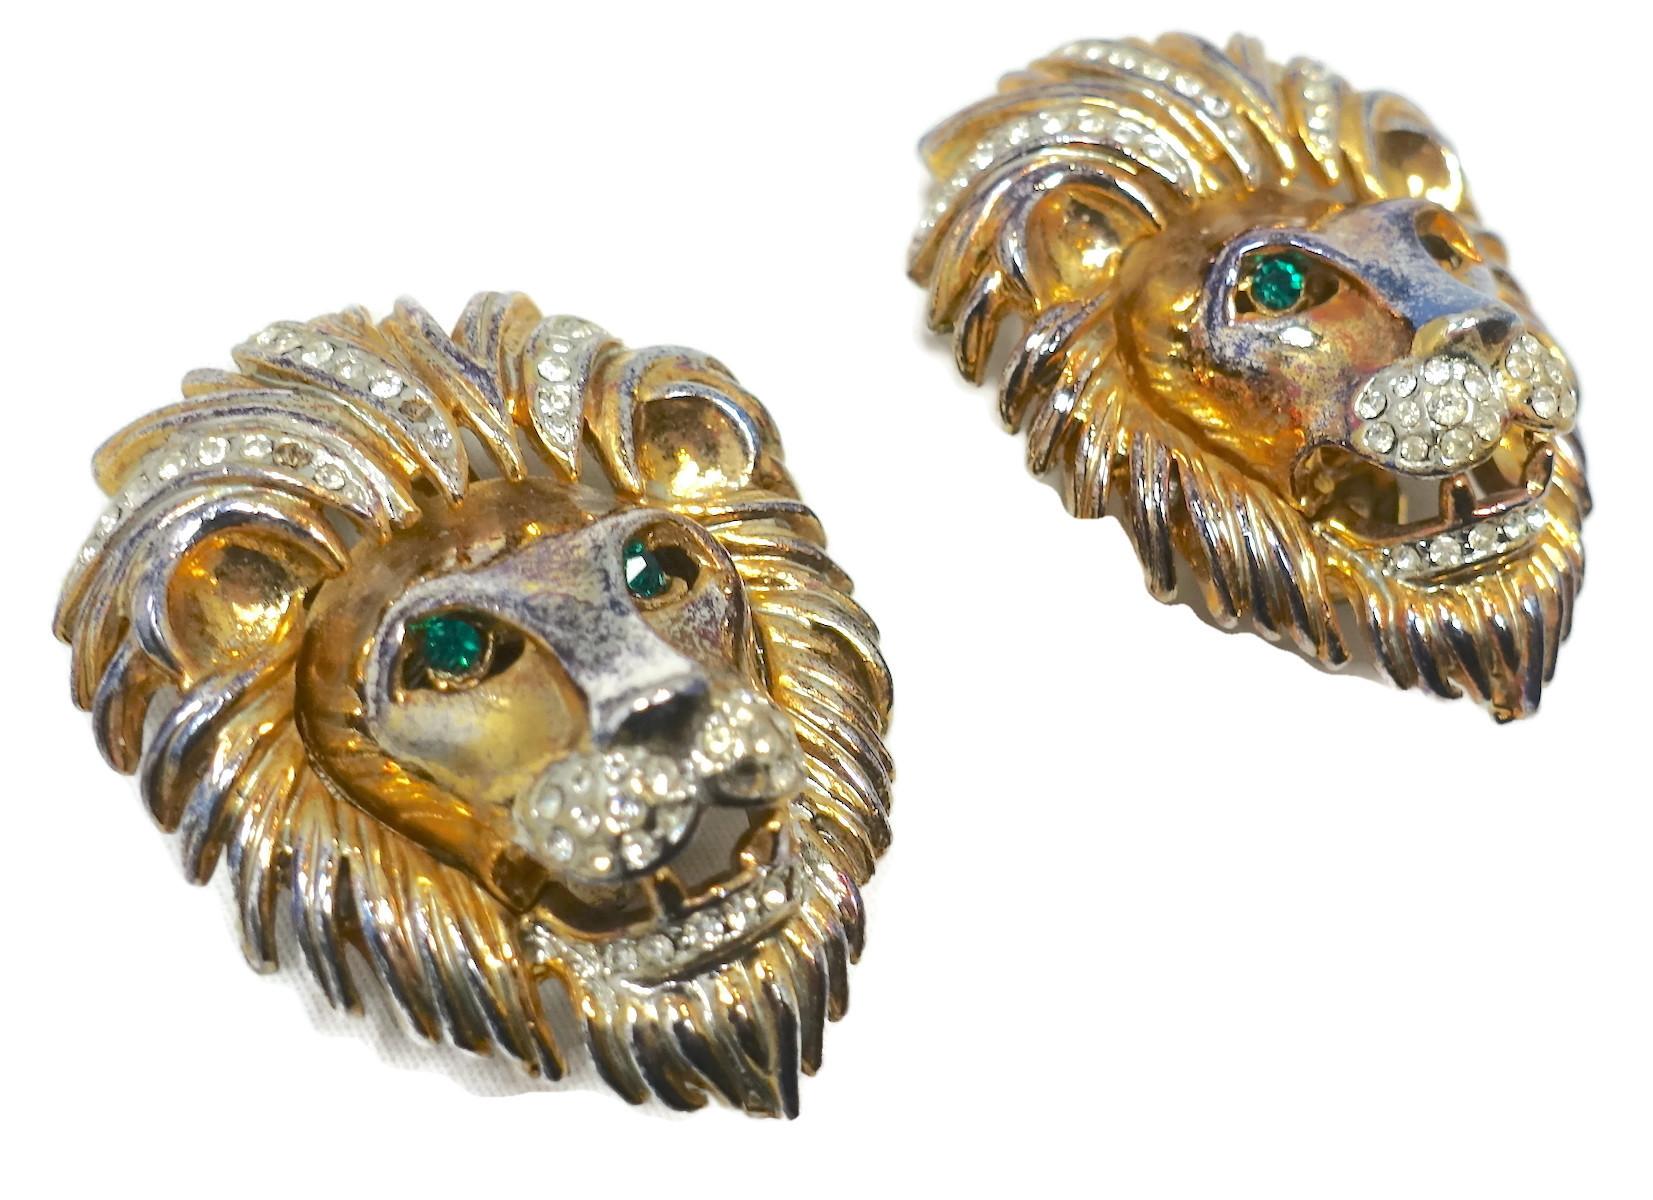 These vintage earrings have a lion’s head design with emerald green crystal eyes and clear crystal accents in a gold tone setting.  In excellent condition, these clip earrings measure 1-1/2” x 1-1/8”.